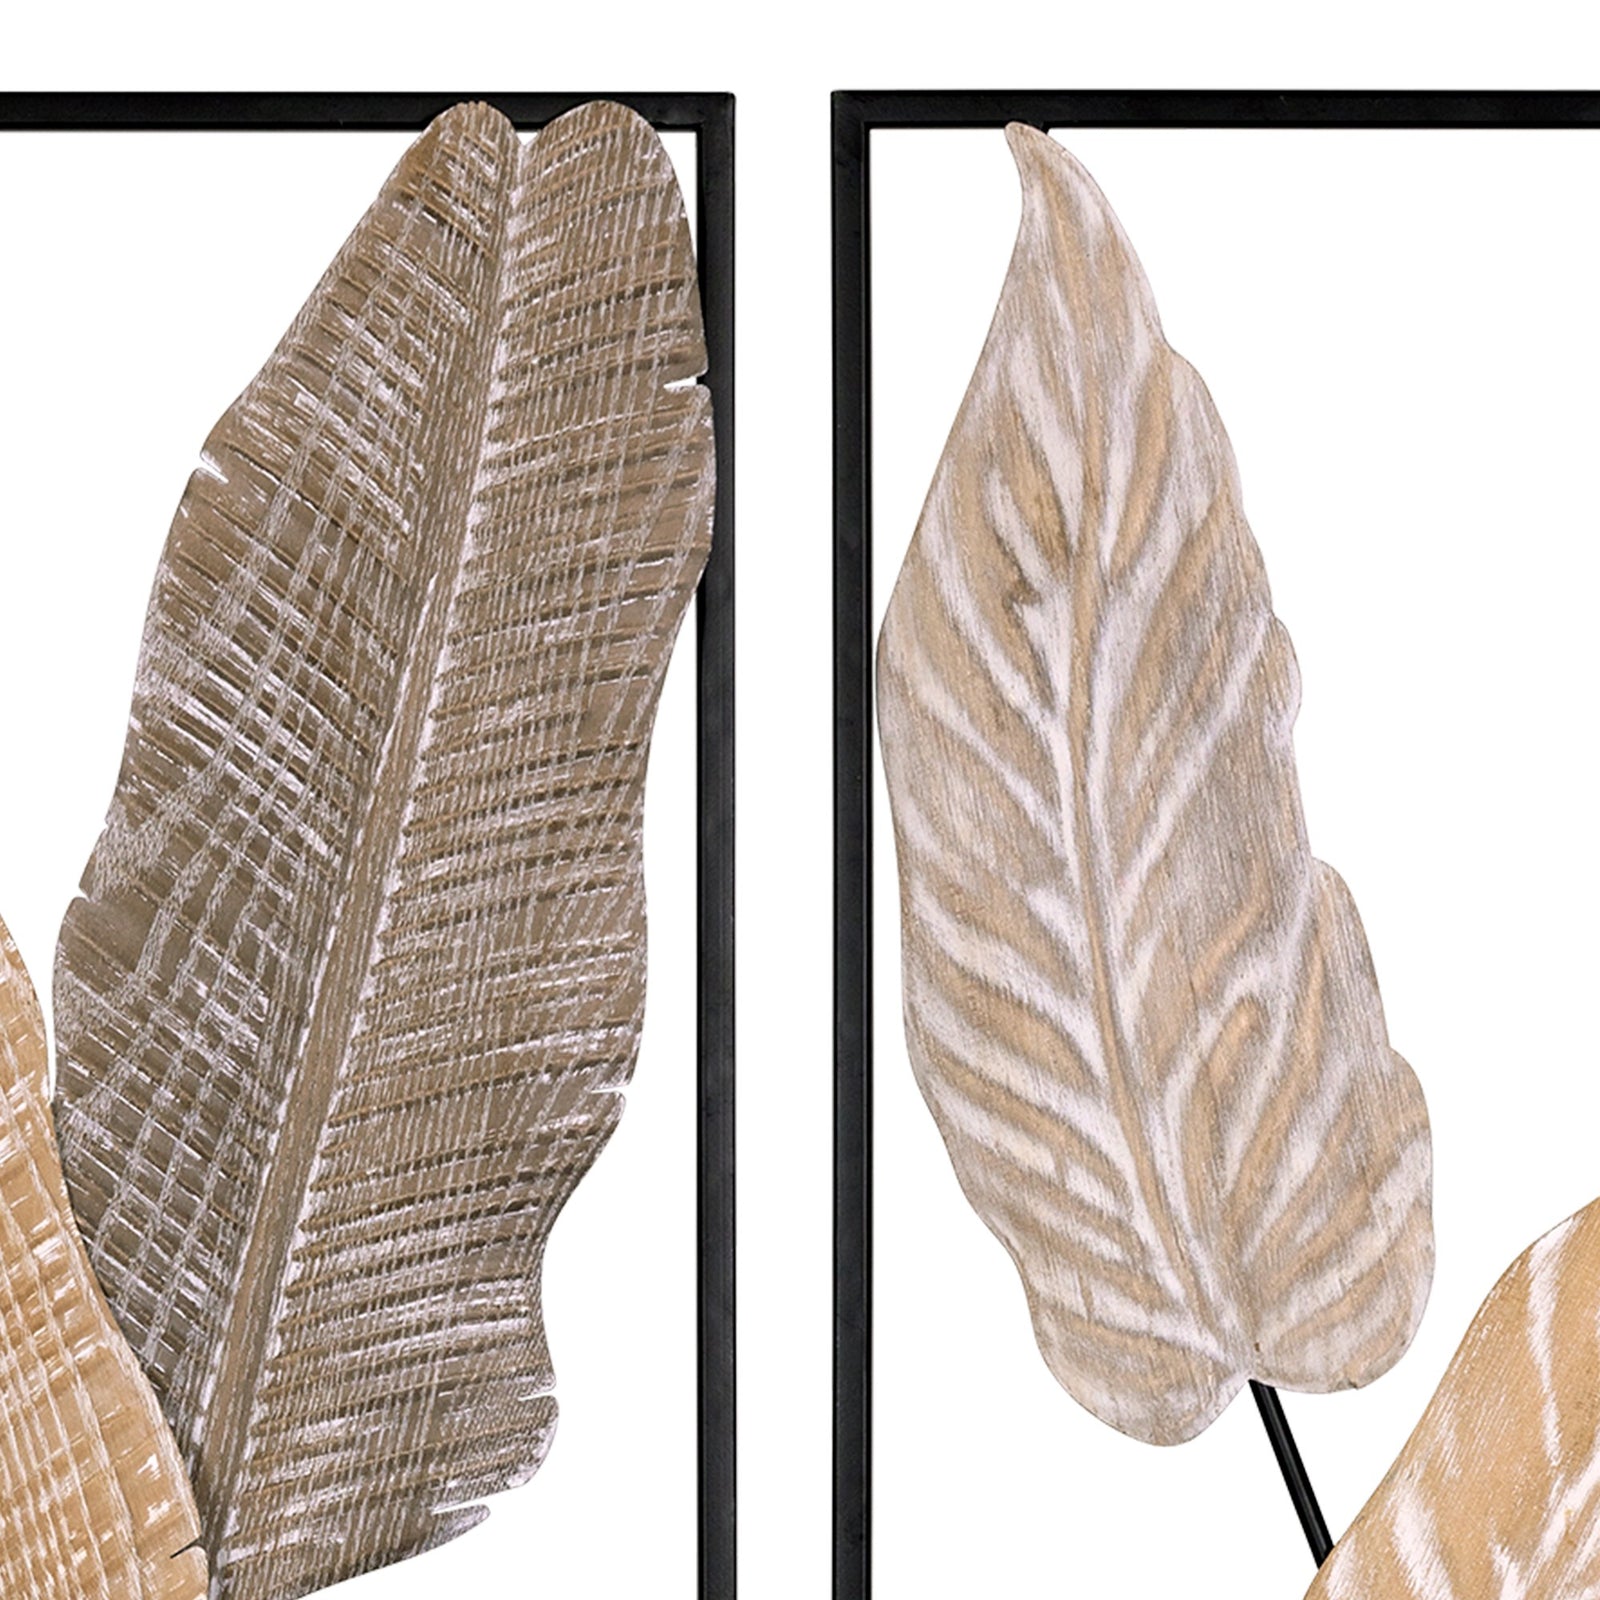 Two Piece Metal Leaves and Branch Wall Art